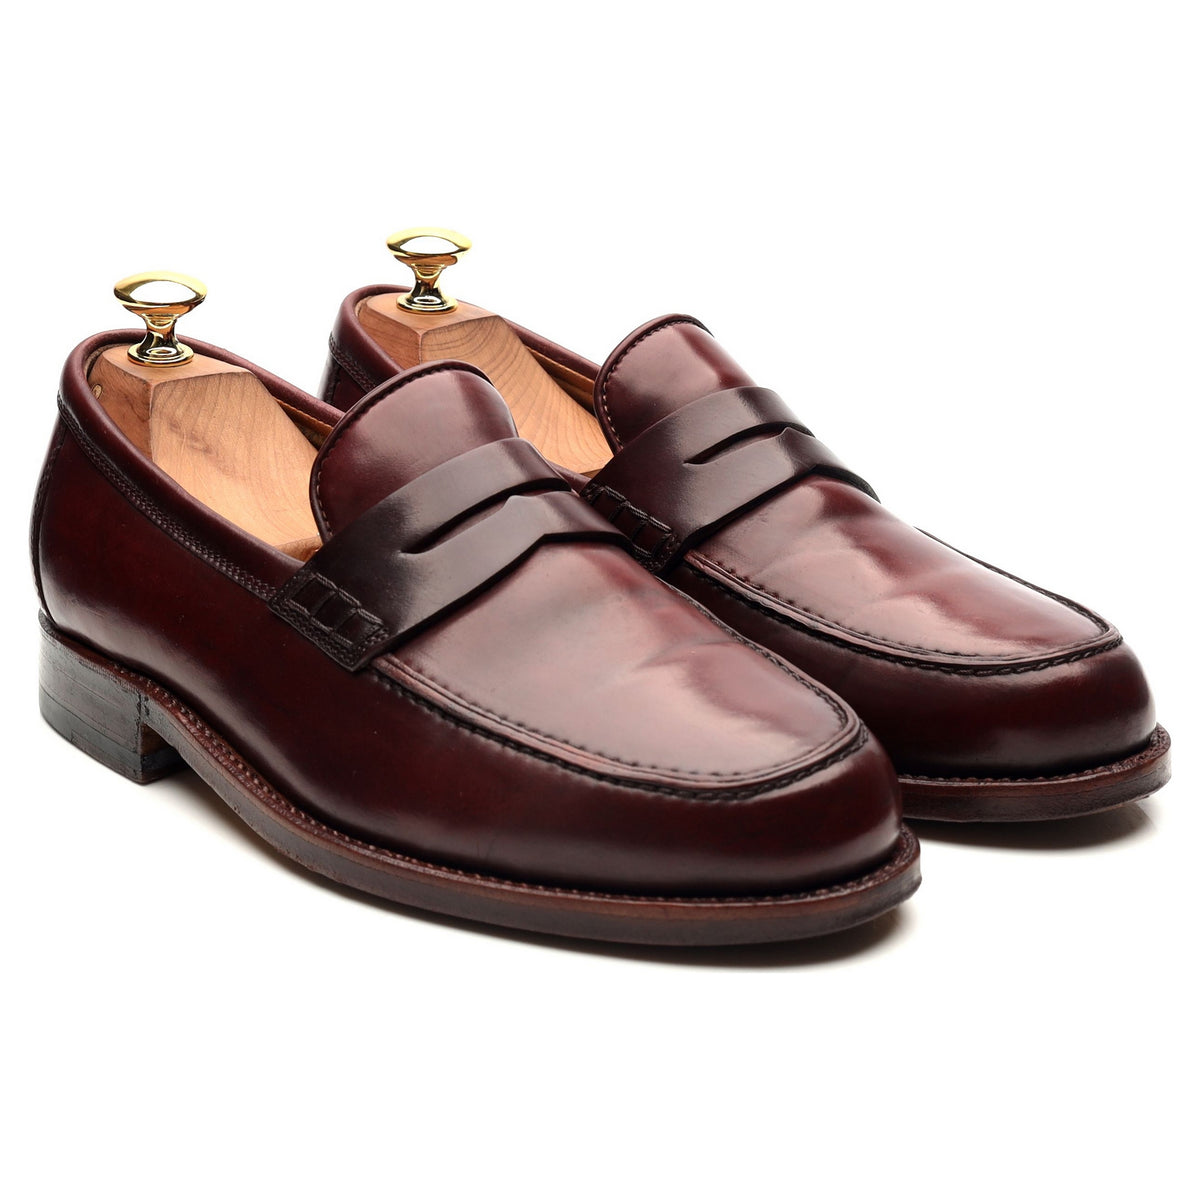 Burgundy Cordovan Leather Loafers UK 6